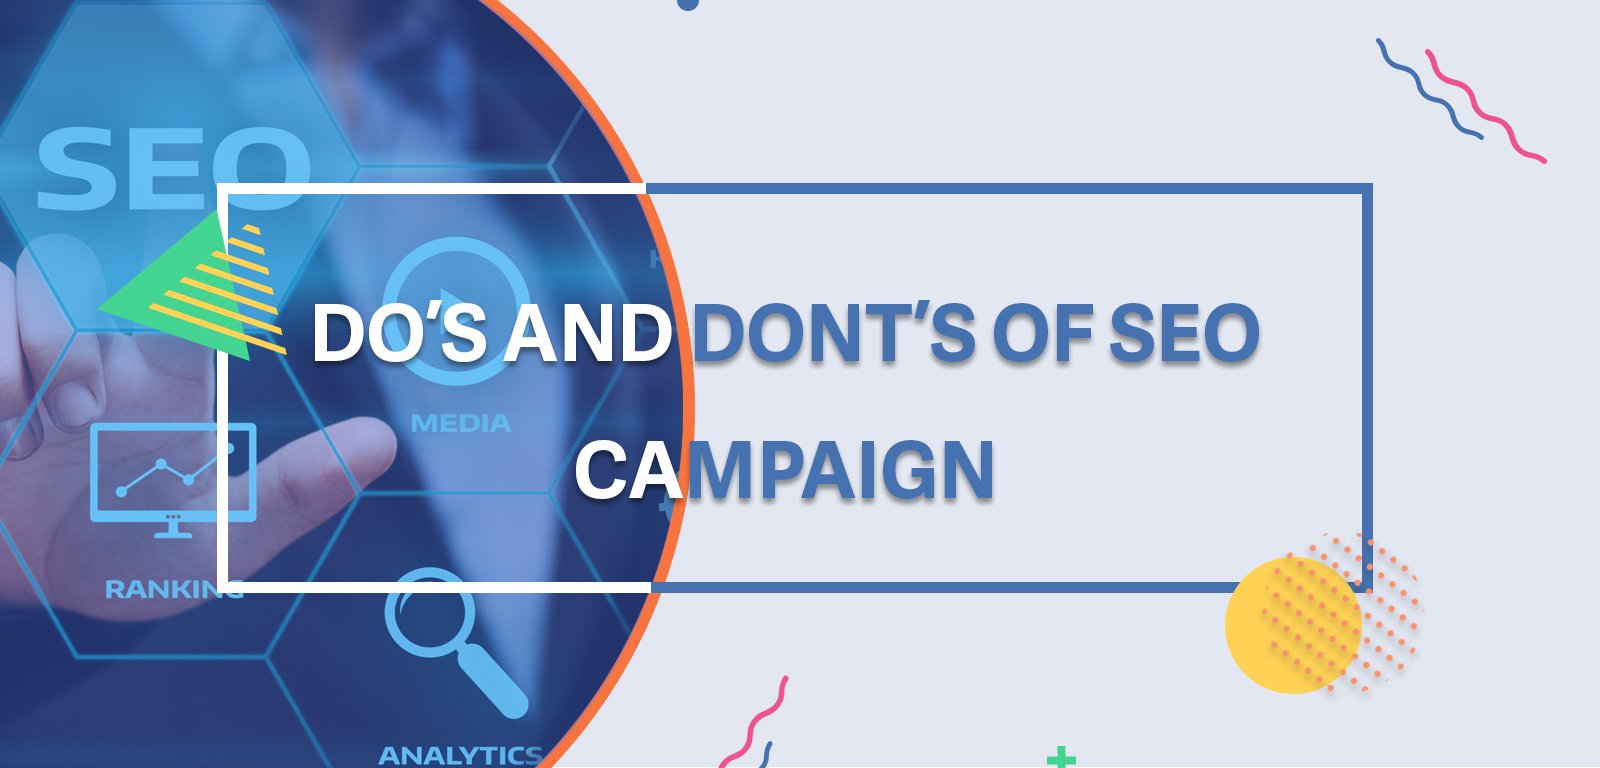 DO’S AND DONT’S OF SEO CAMPAIGN